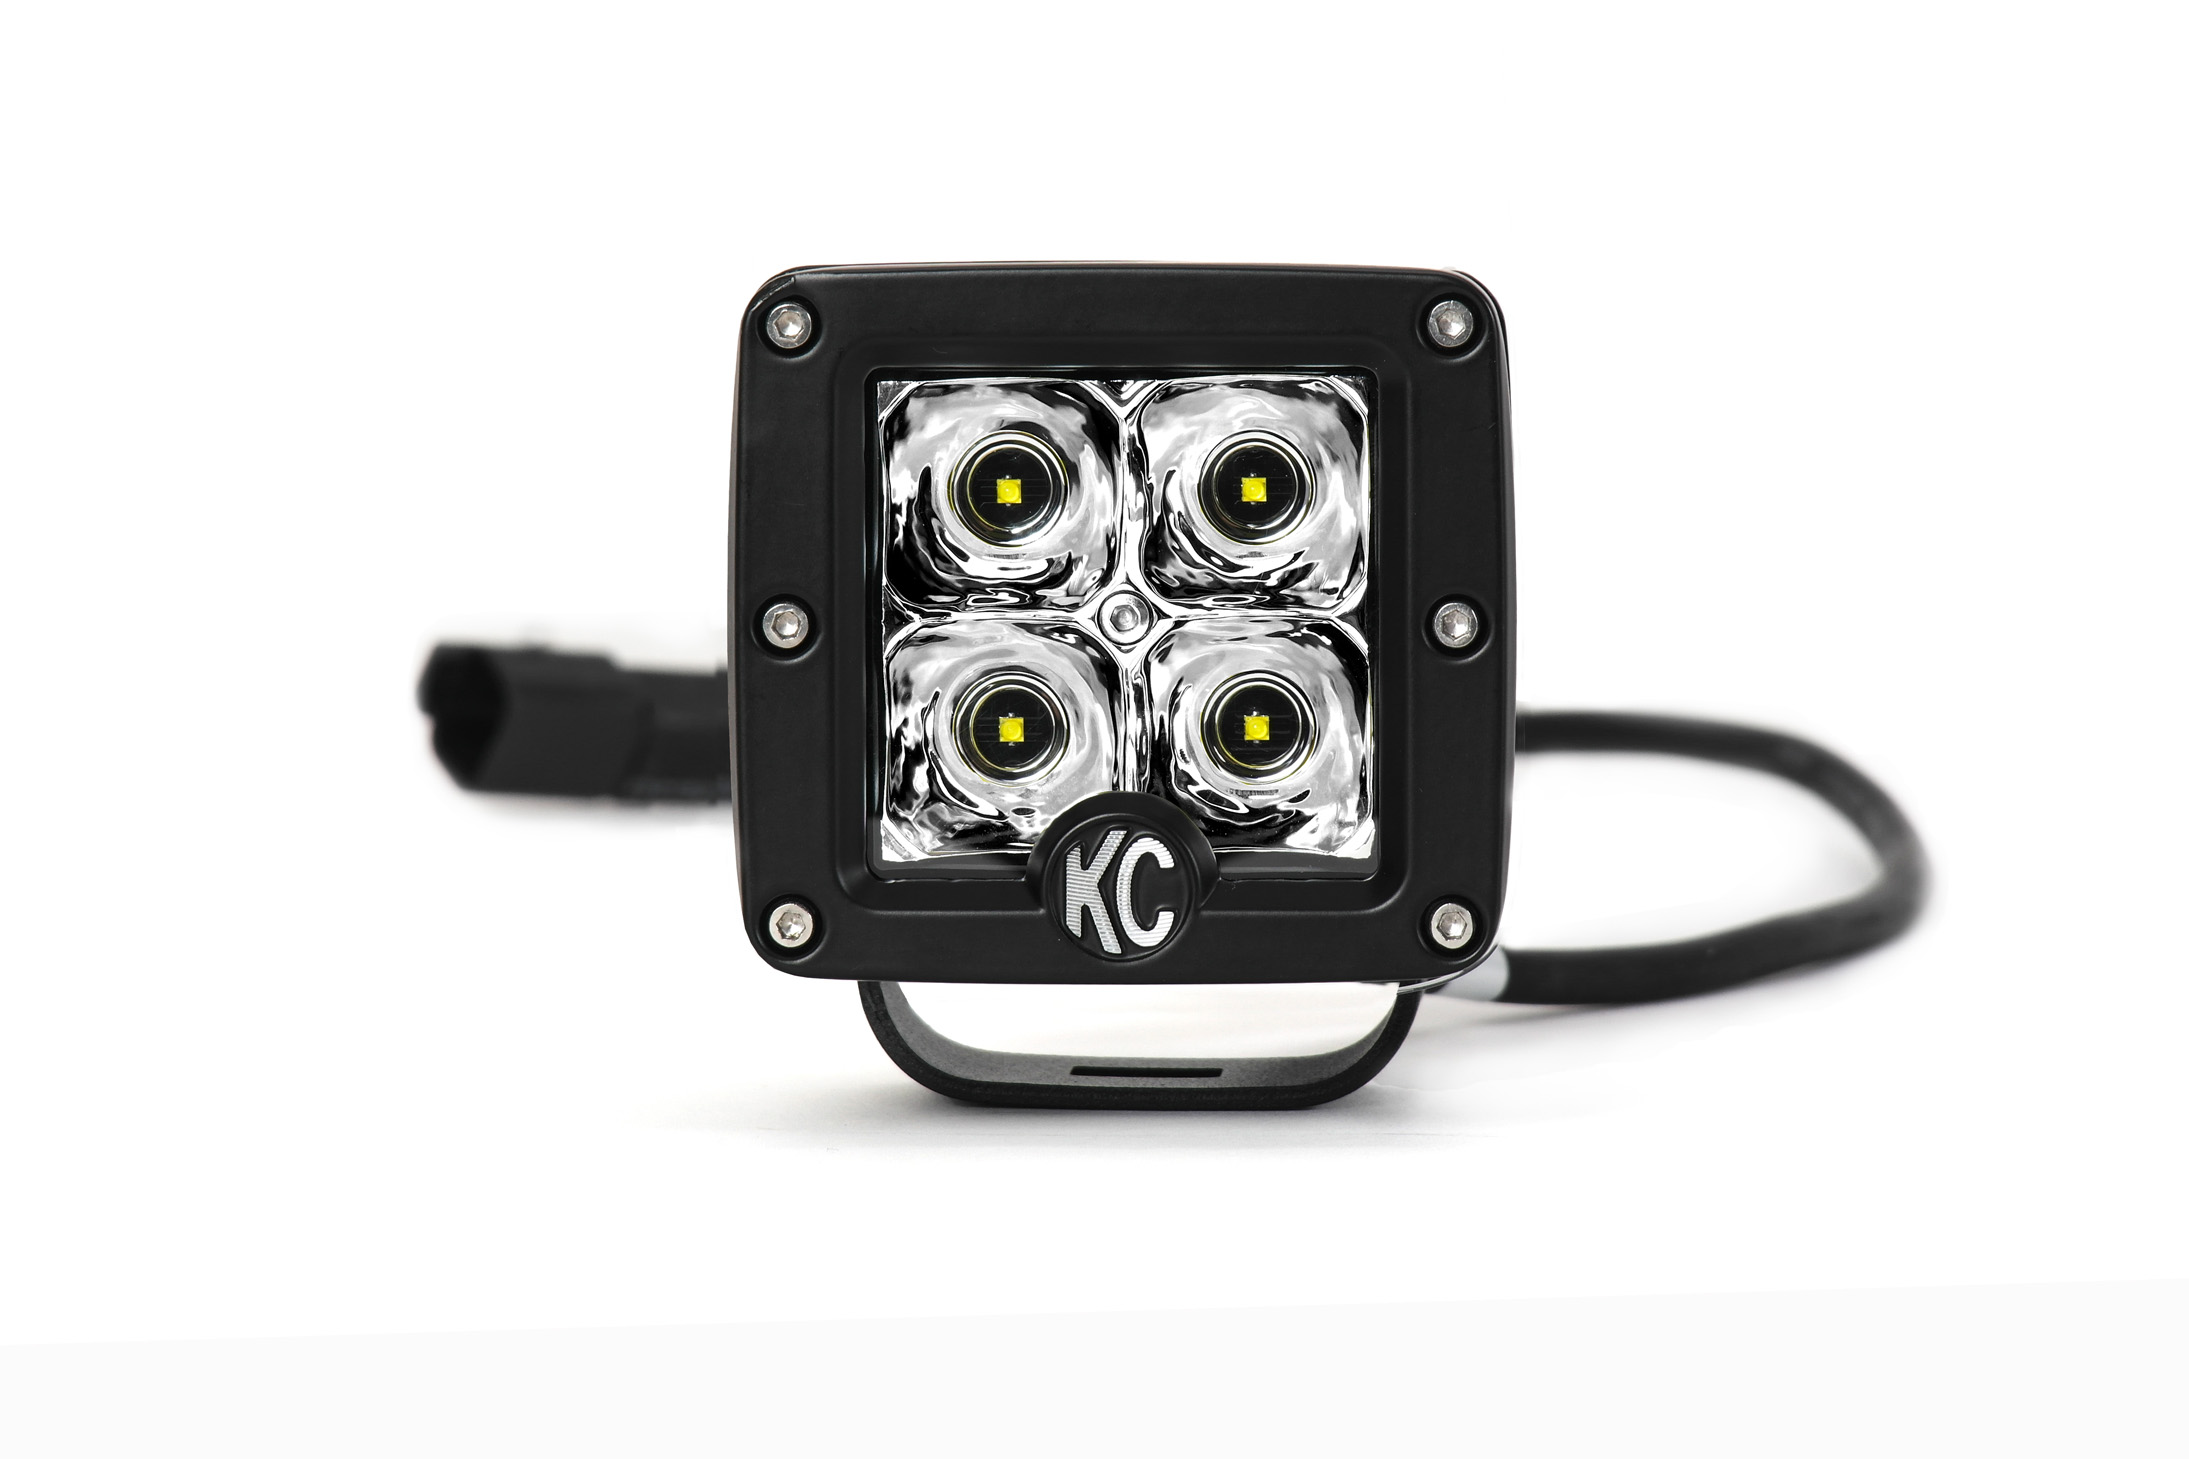 Picture of KC HiLiTES 330 3" C-Series C3 Led Spot Beam Black Pair Pack System - 330